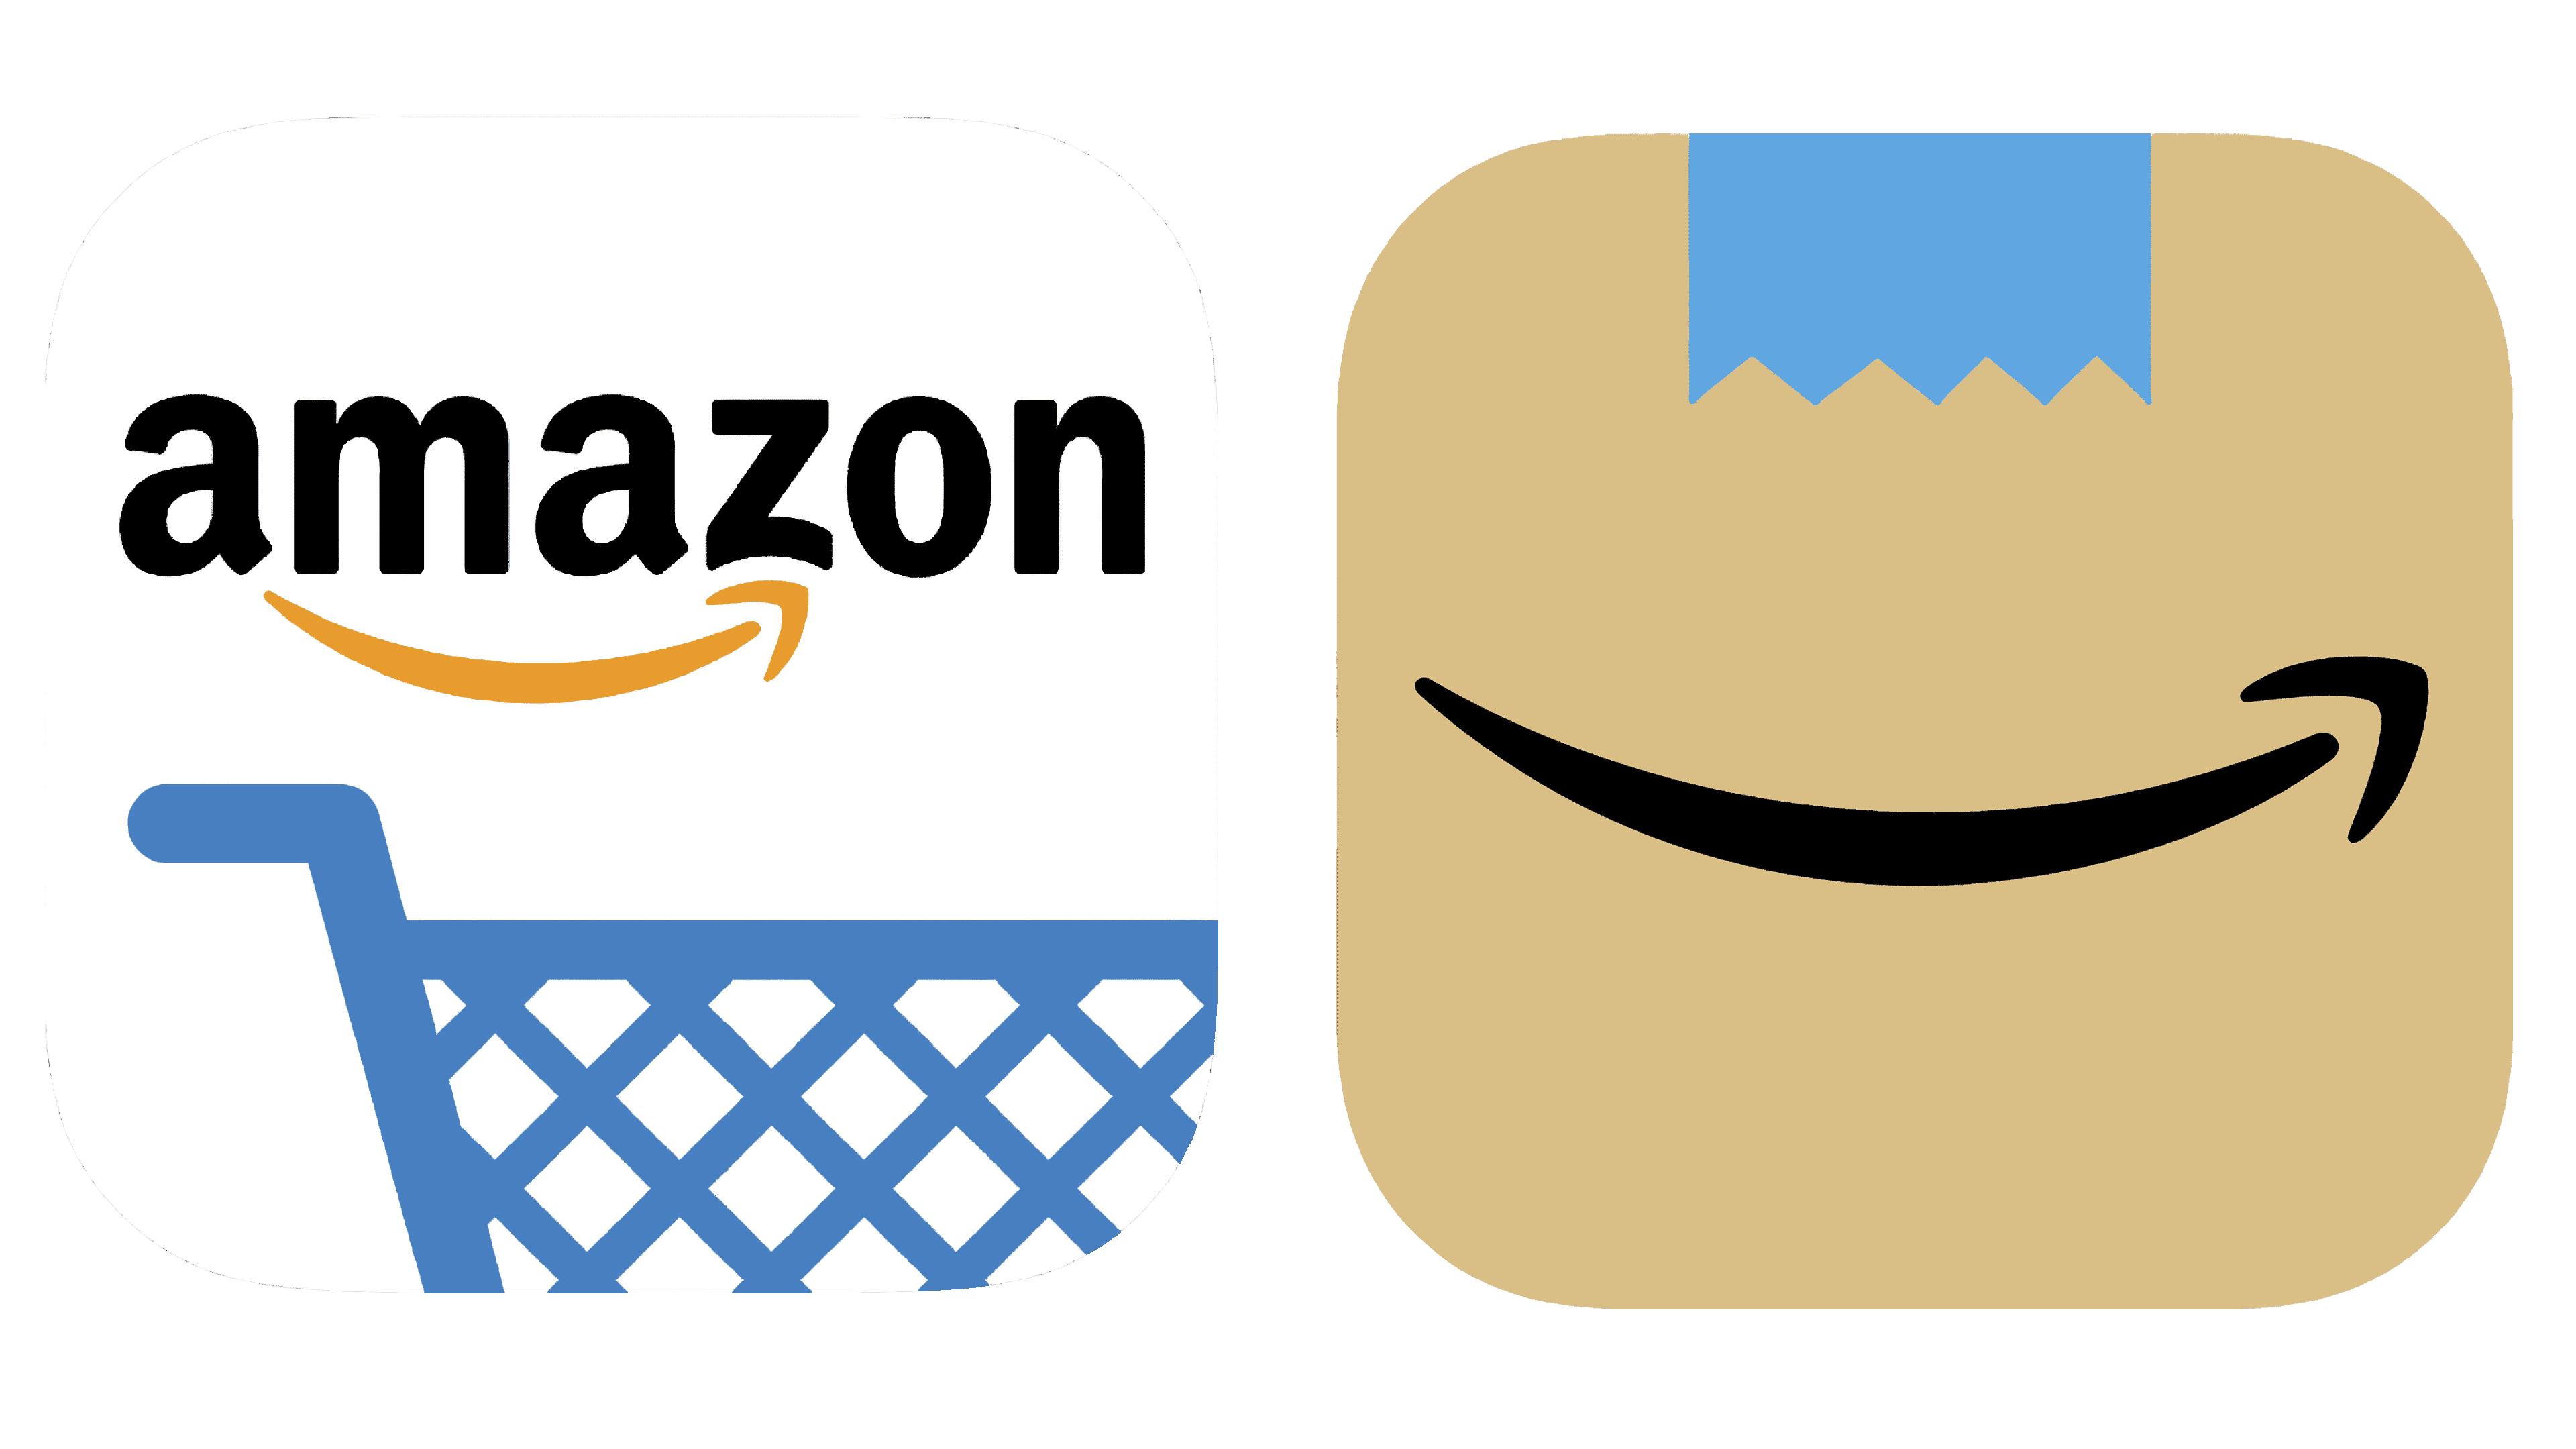 The New Icon For The Amazon App Drew Controversy From Users